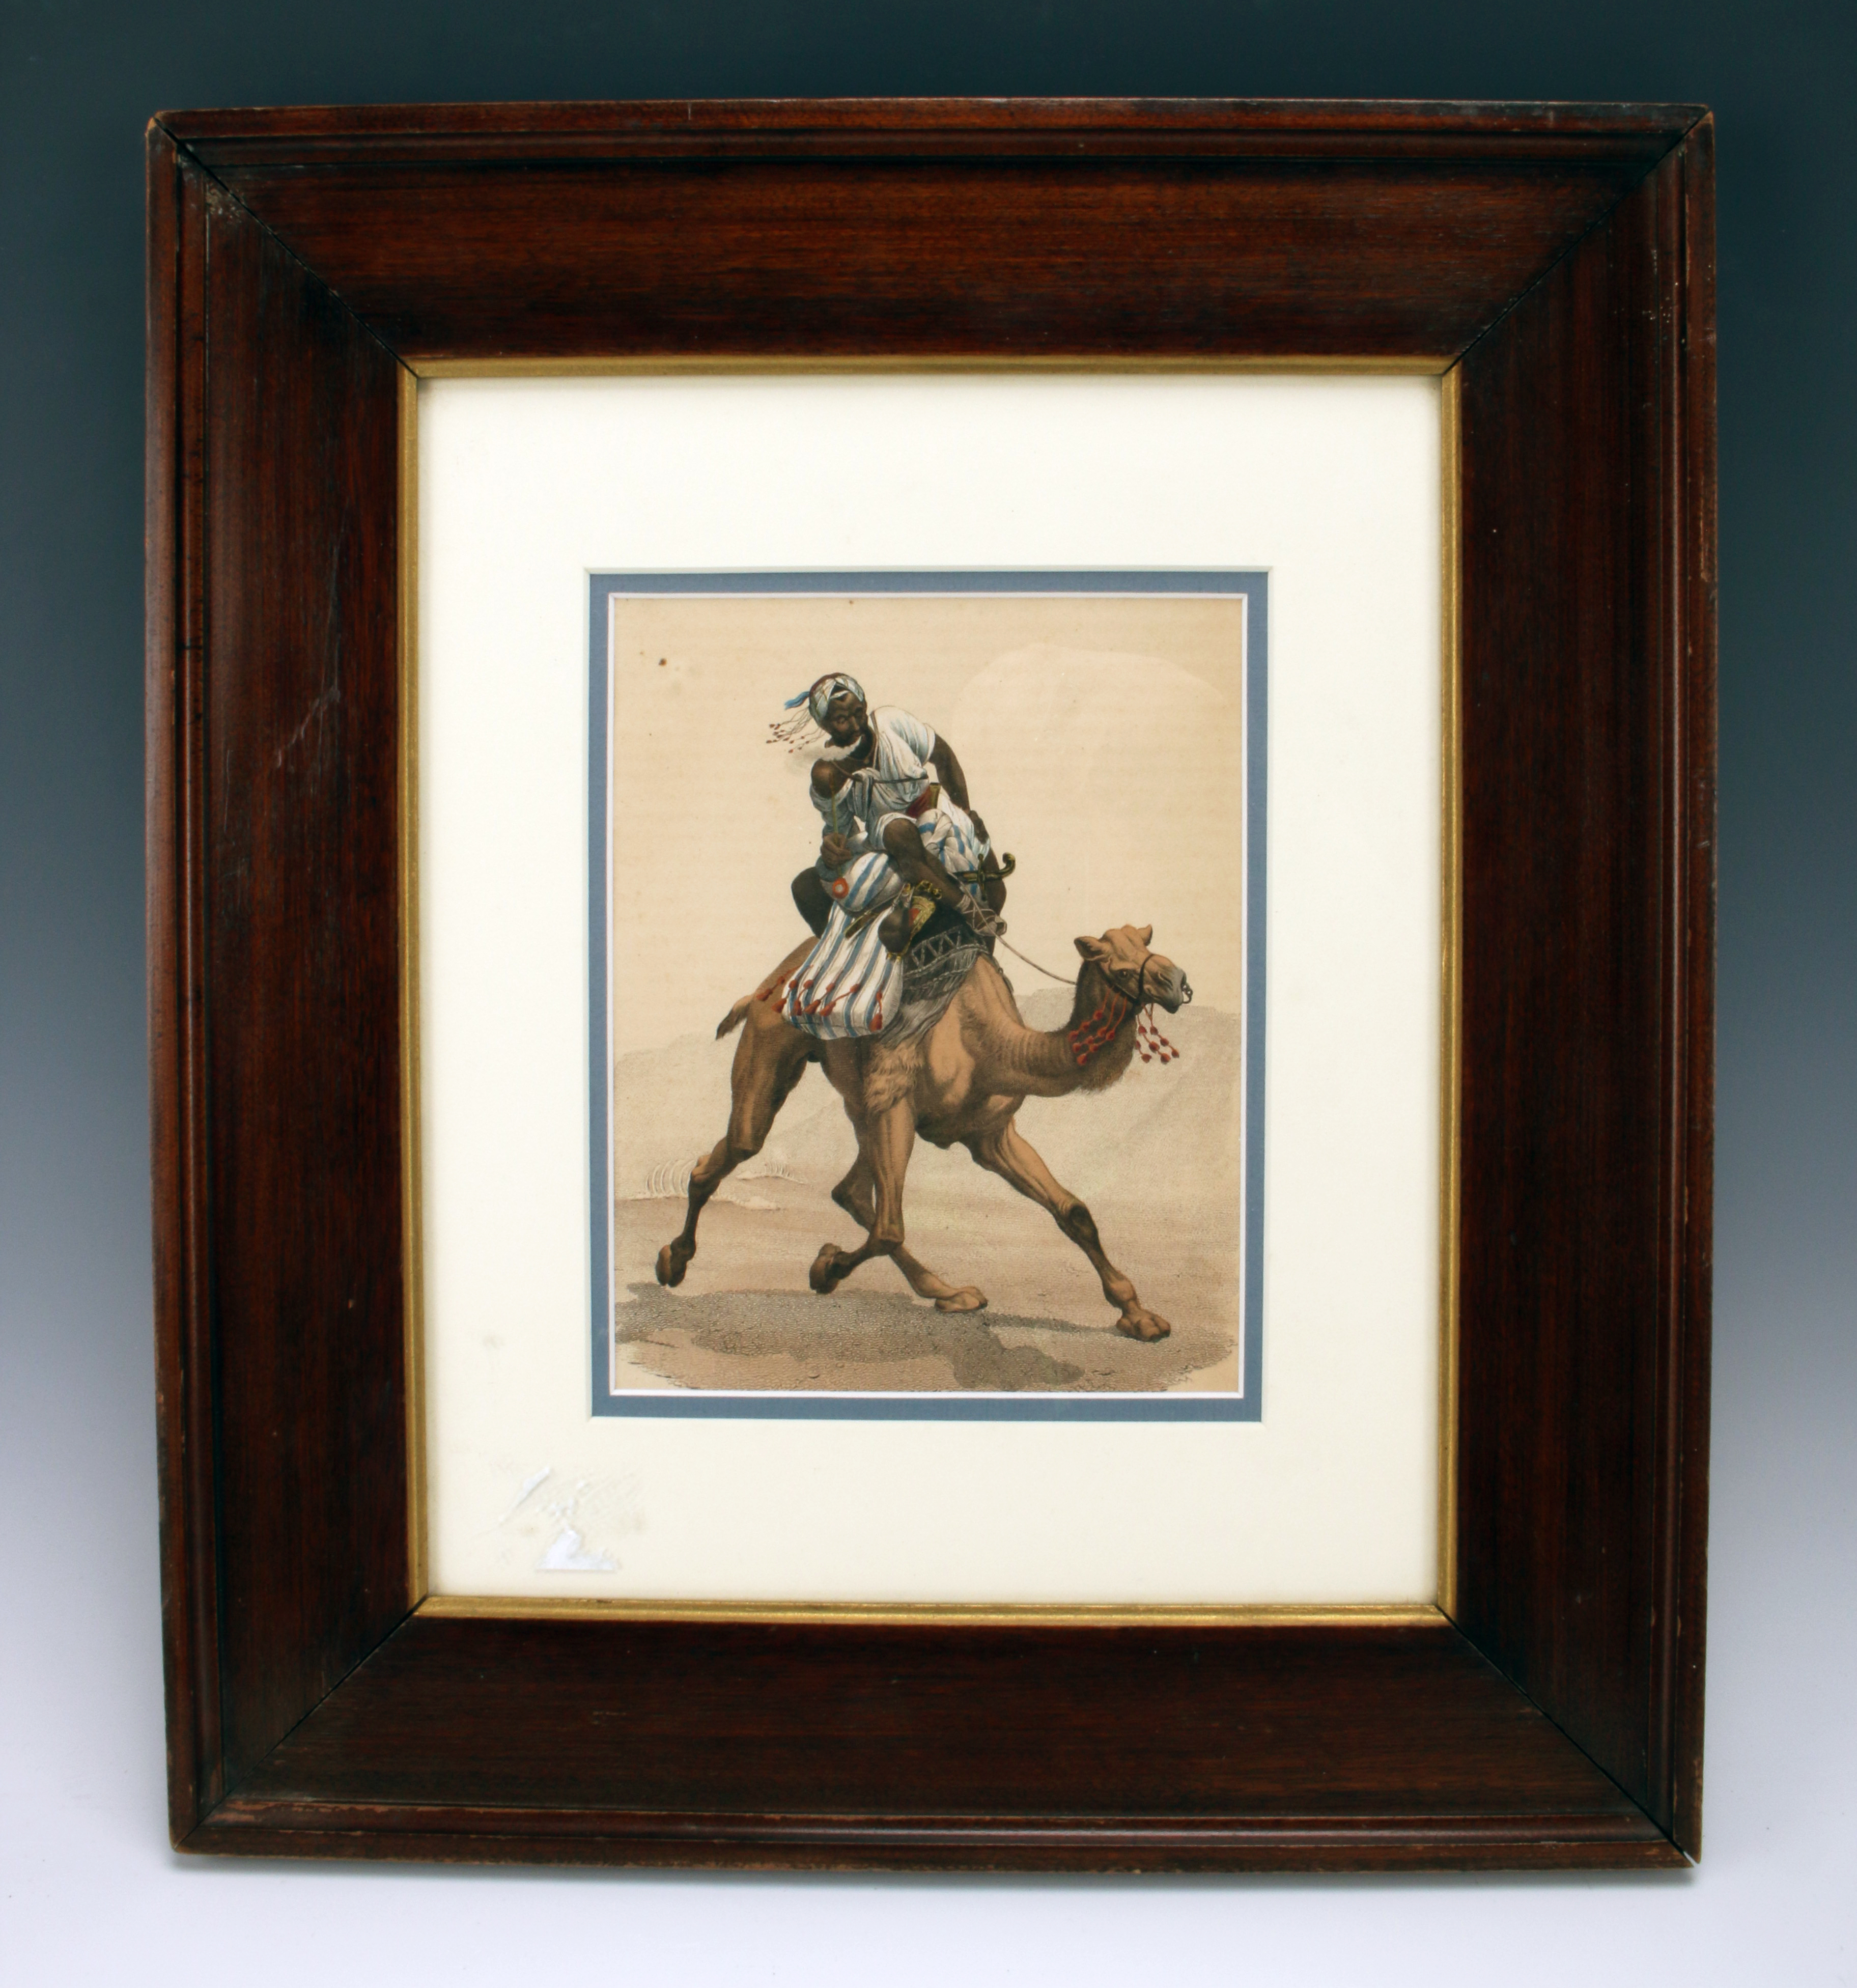 Vintage Hand-Colored Lithograph - Man On Camel In Desert image 2